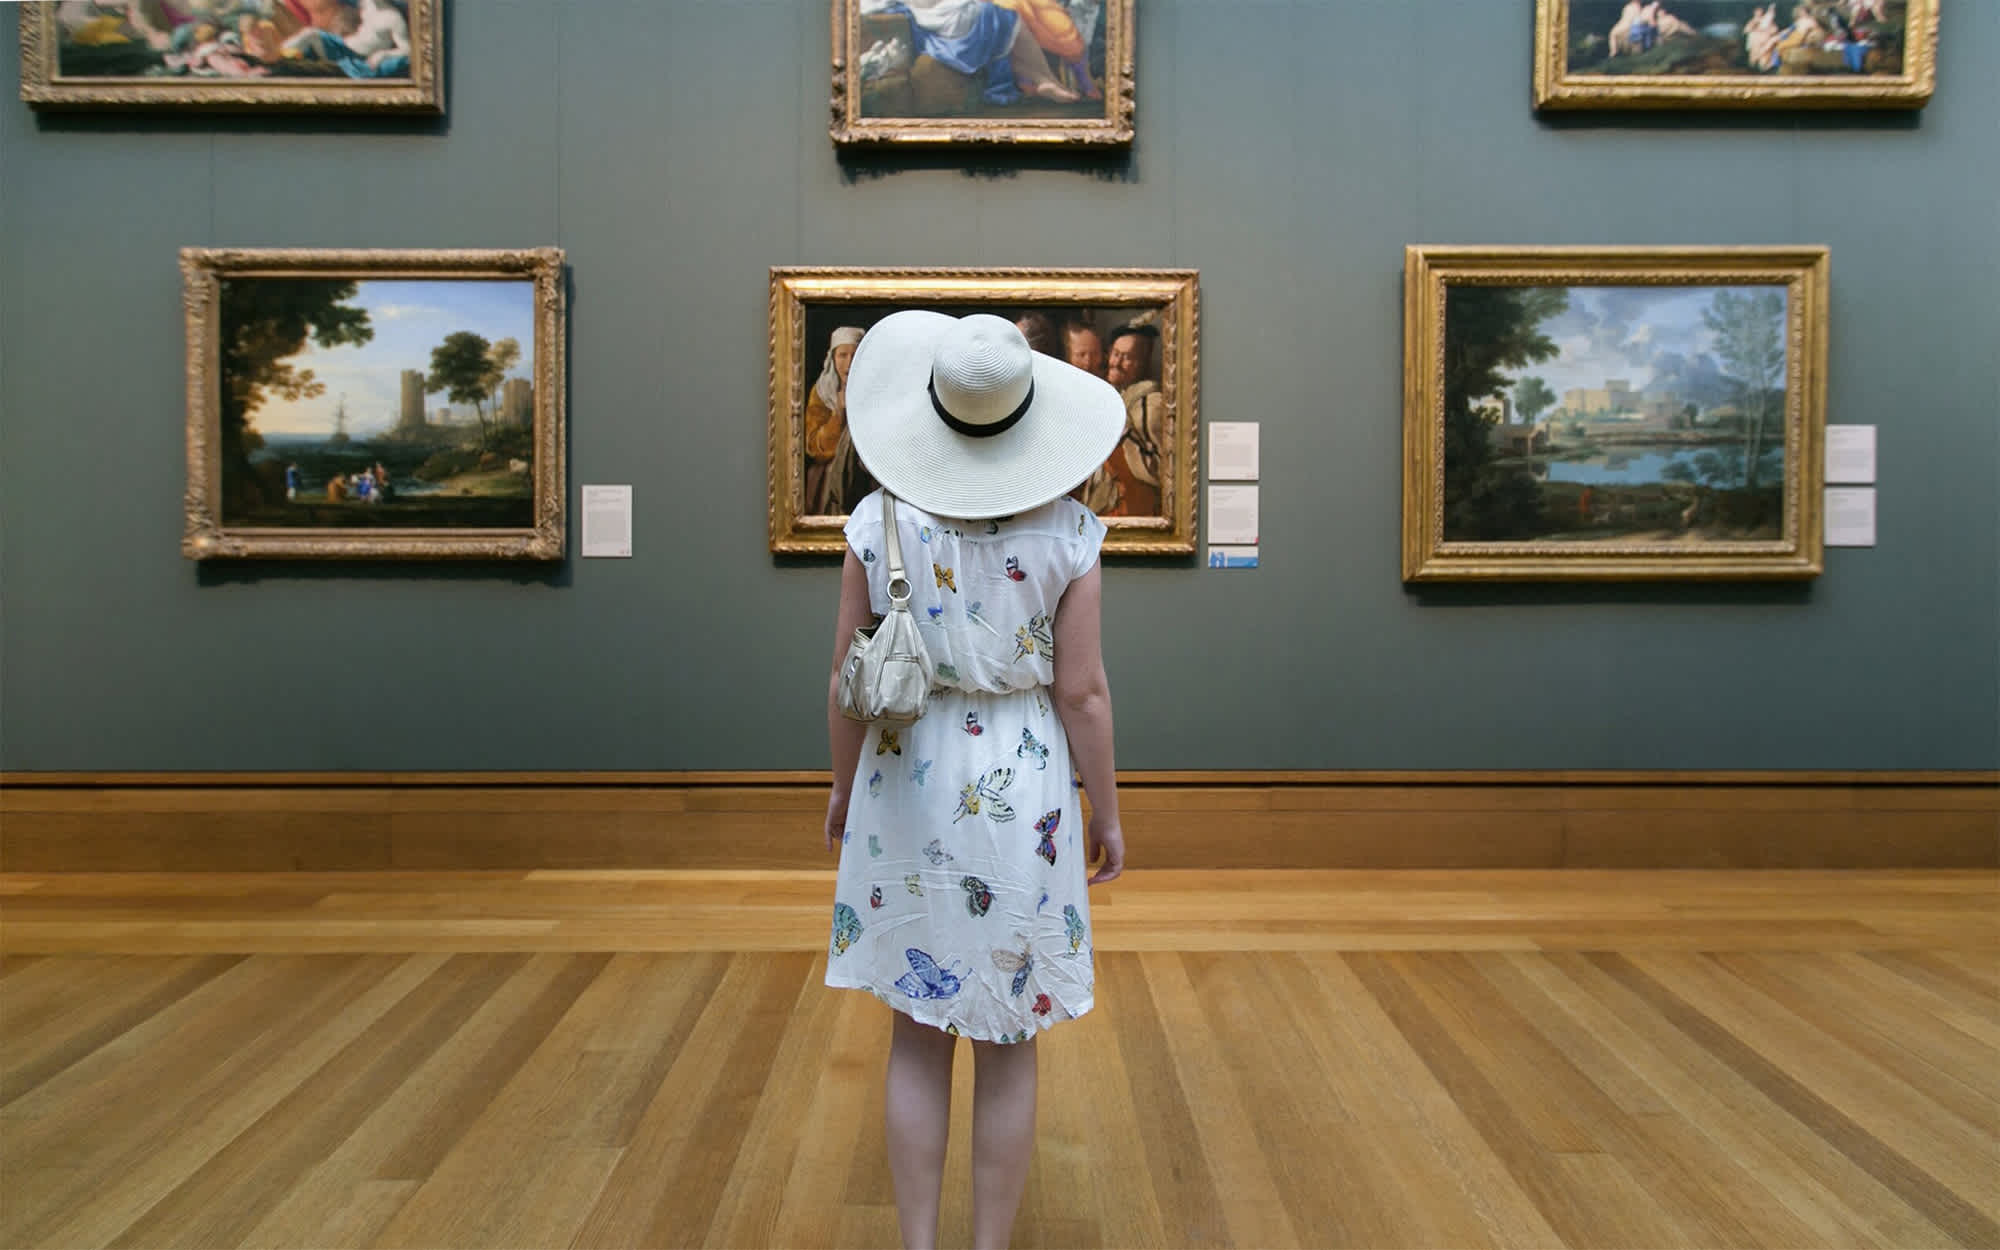 A photo of a woman. She is observing a wall of paintings.